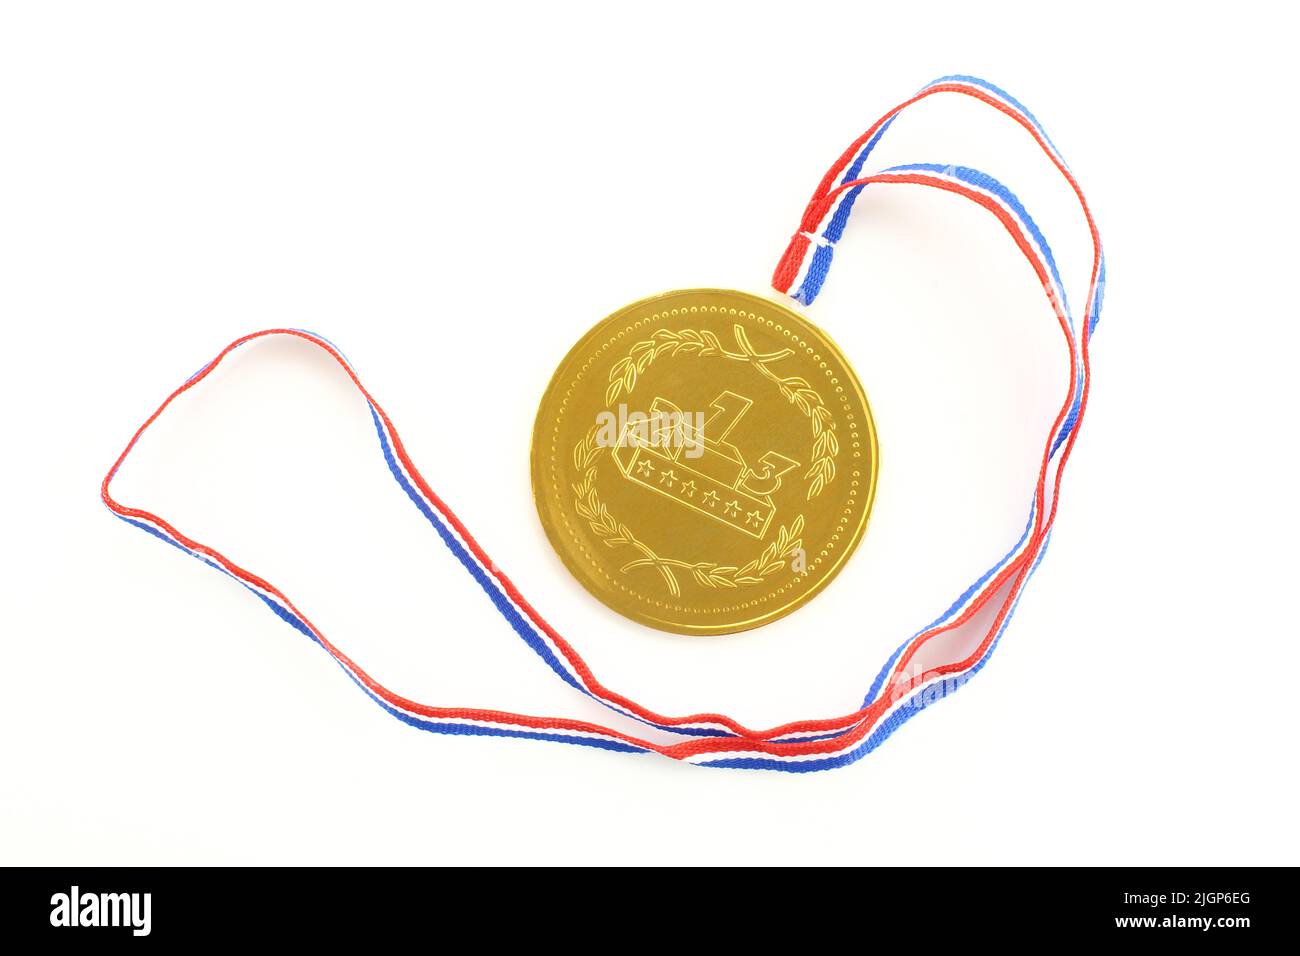 Golden medal prize and colorful ribbon. Round medallion isolated on white background Stock Photo